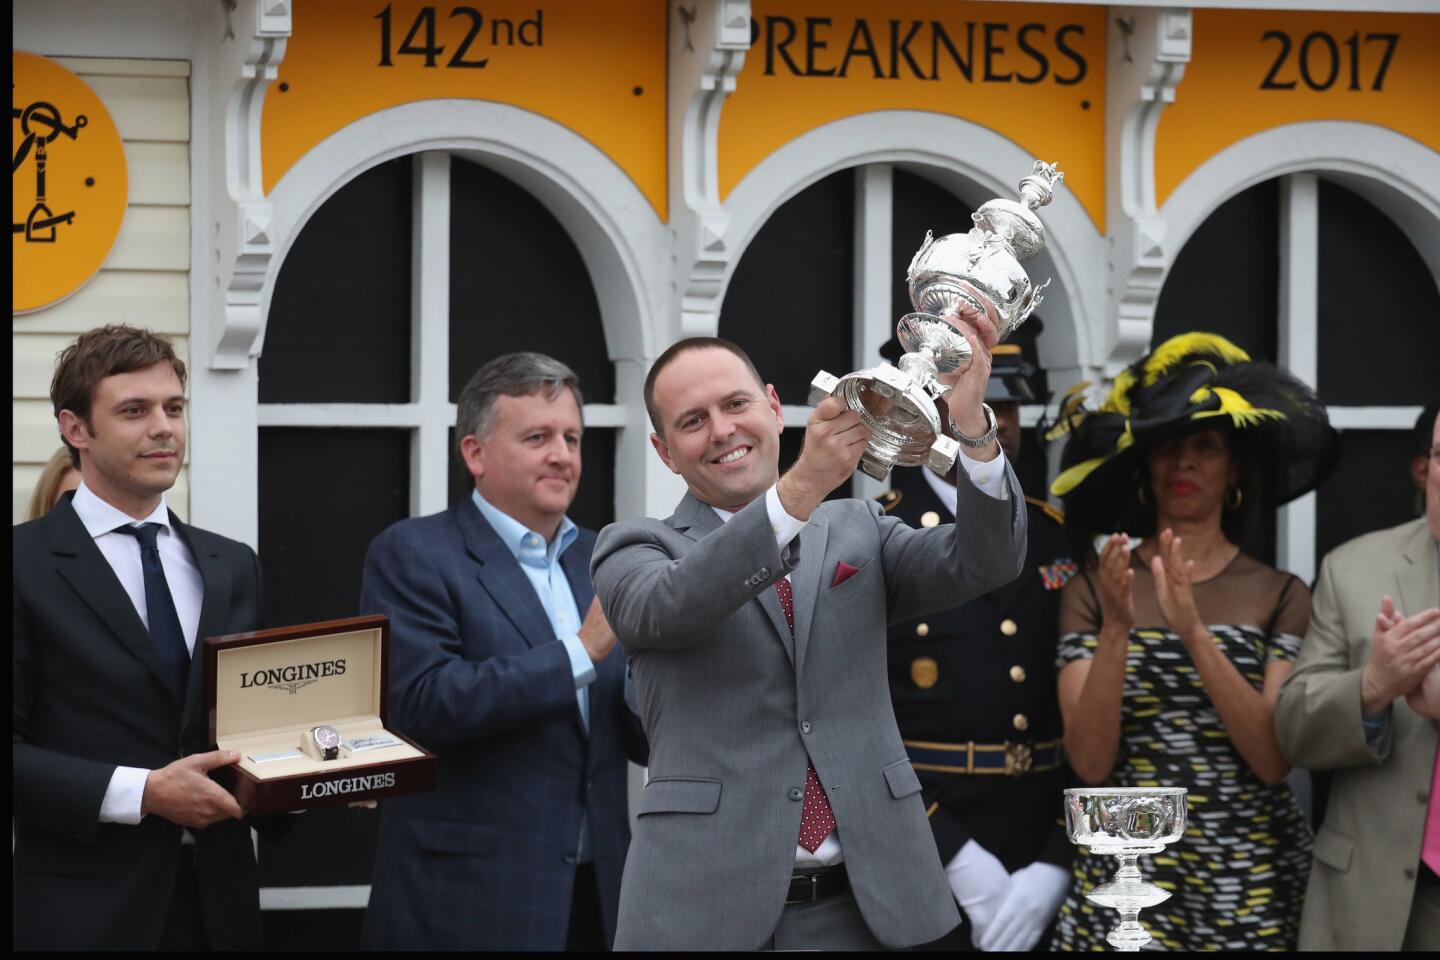 Cloud Computing trainer Chad Brown hoists the winner's trophy after the 142nd running of the Preakness Stakes.